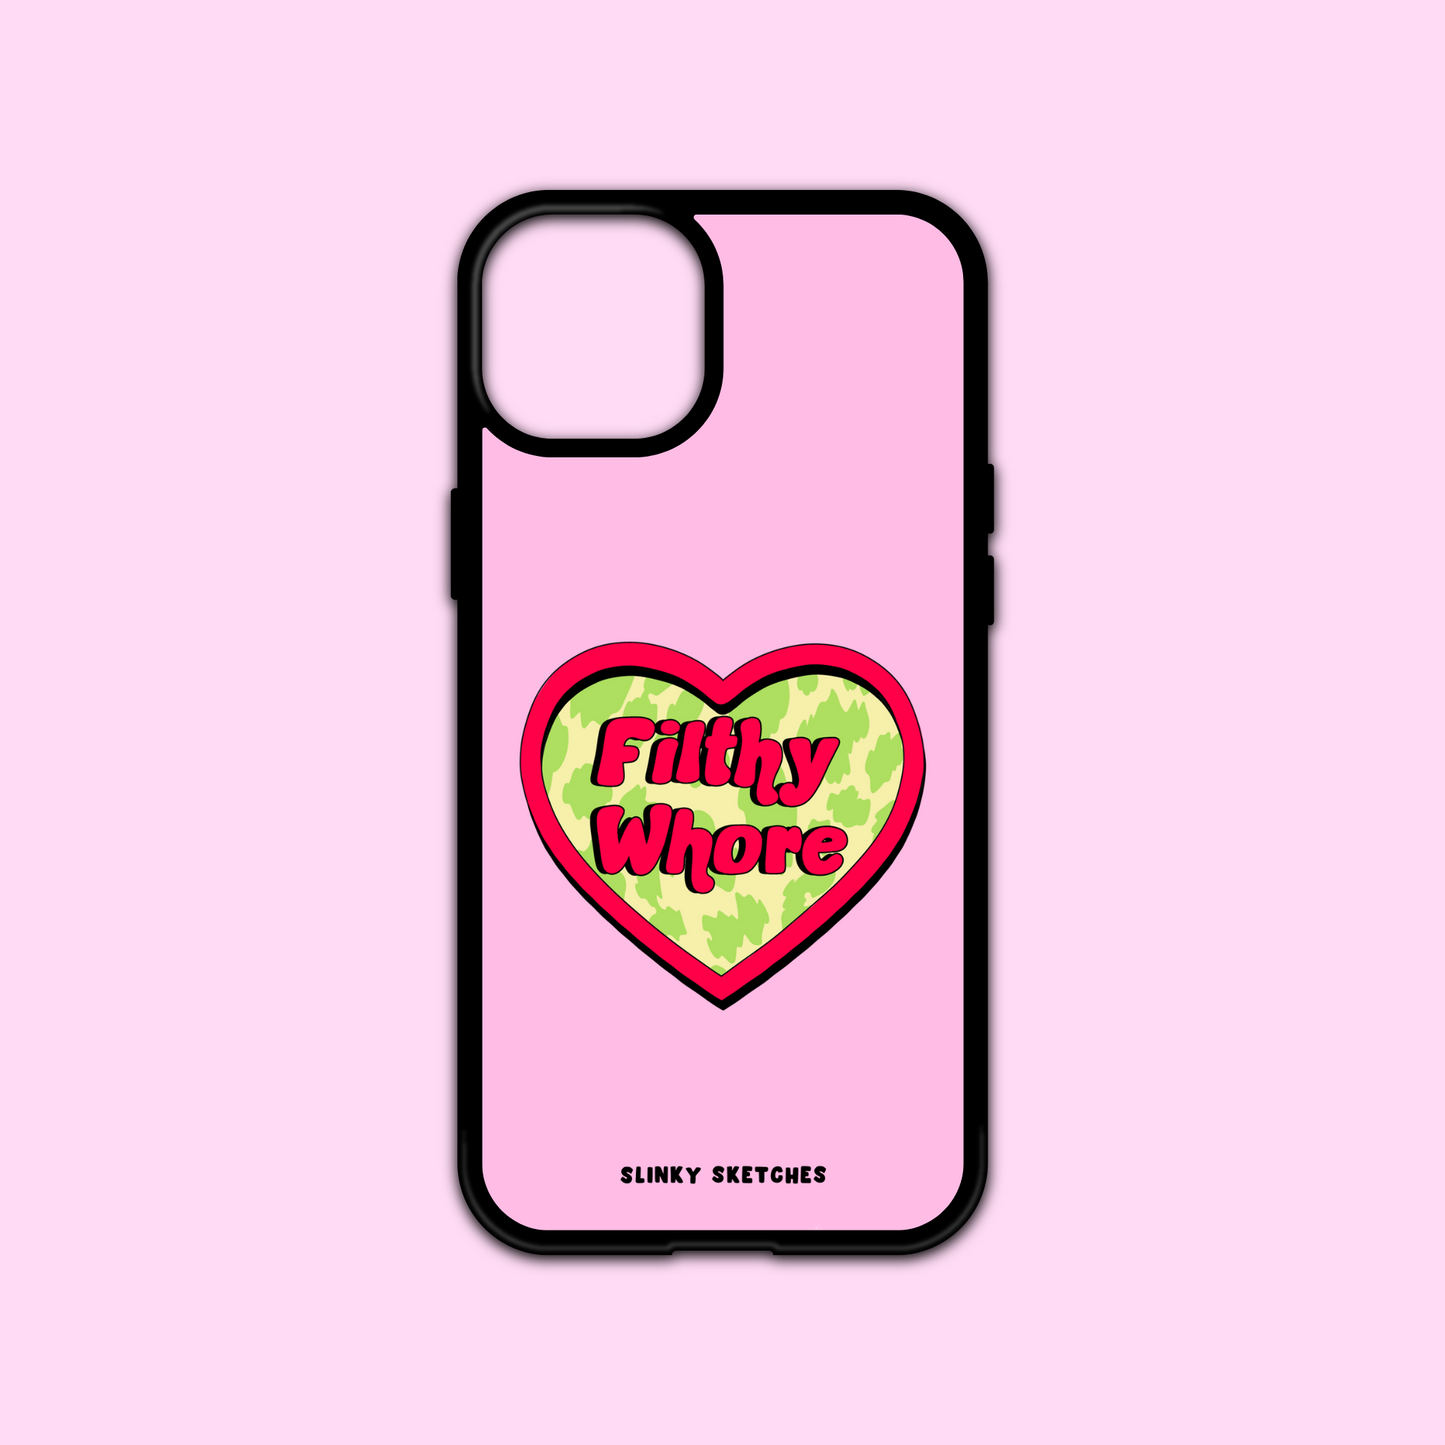 Filthy Whore Phone Case